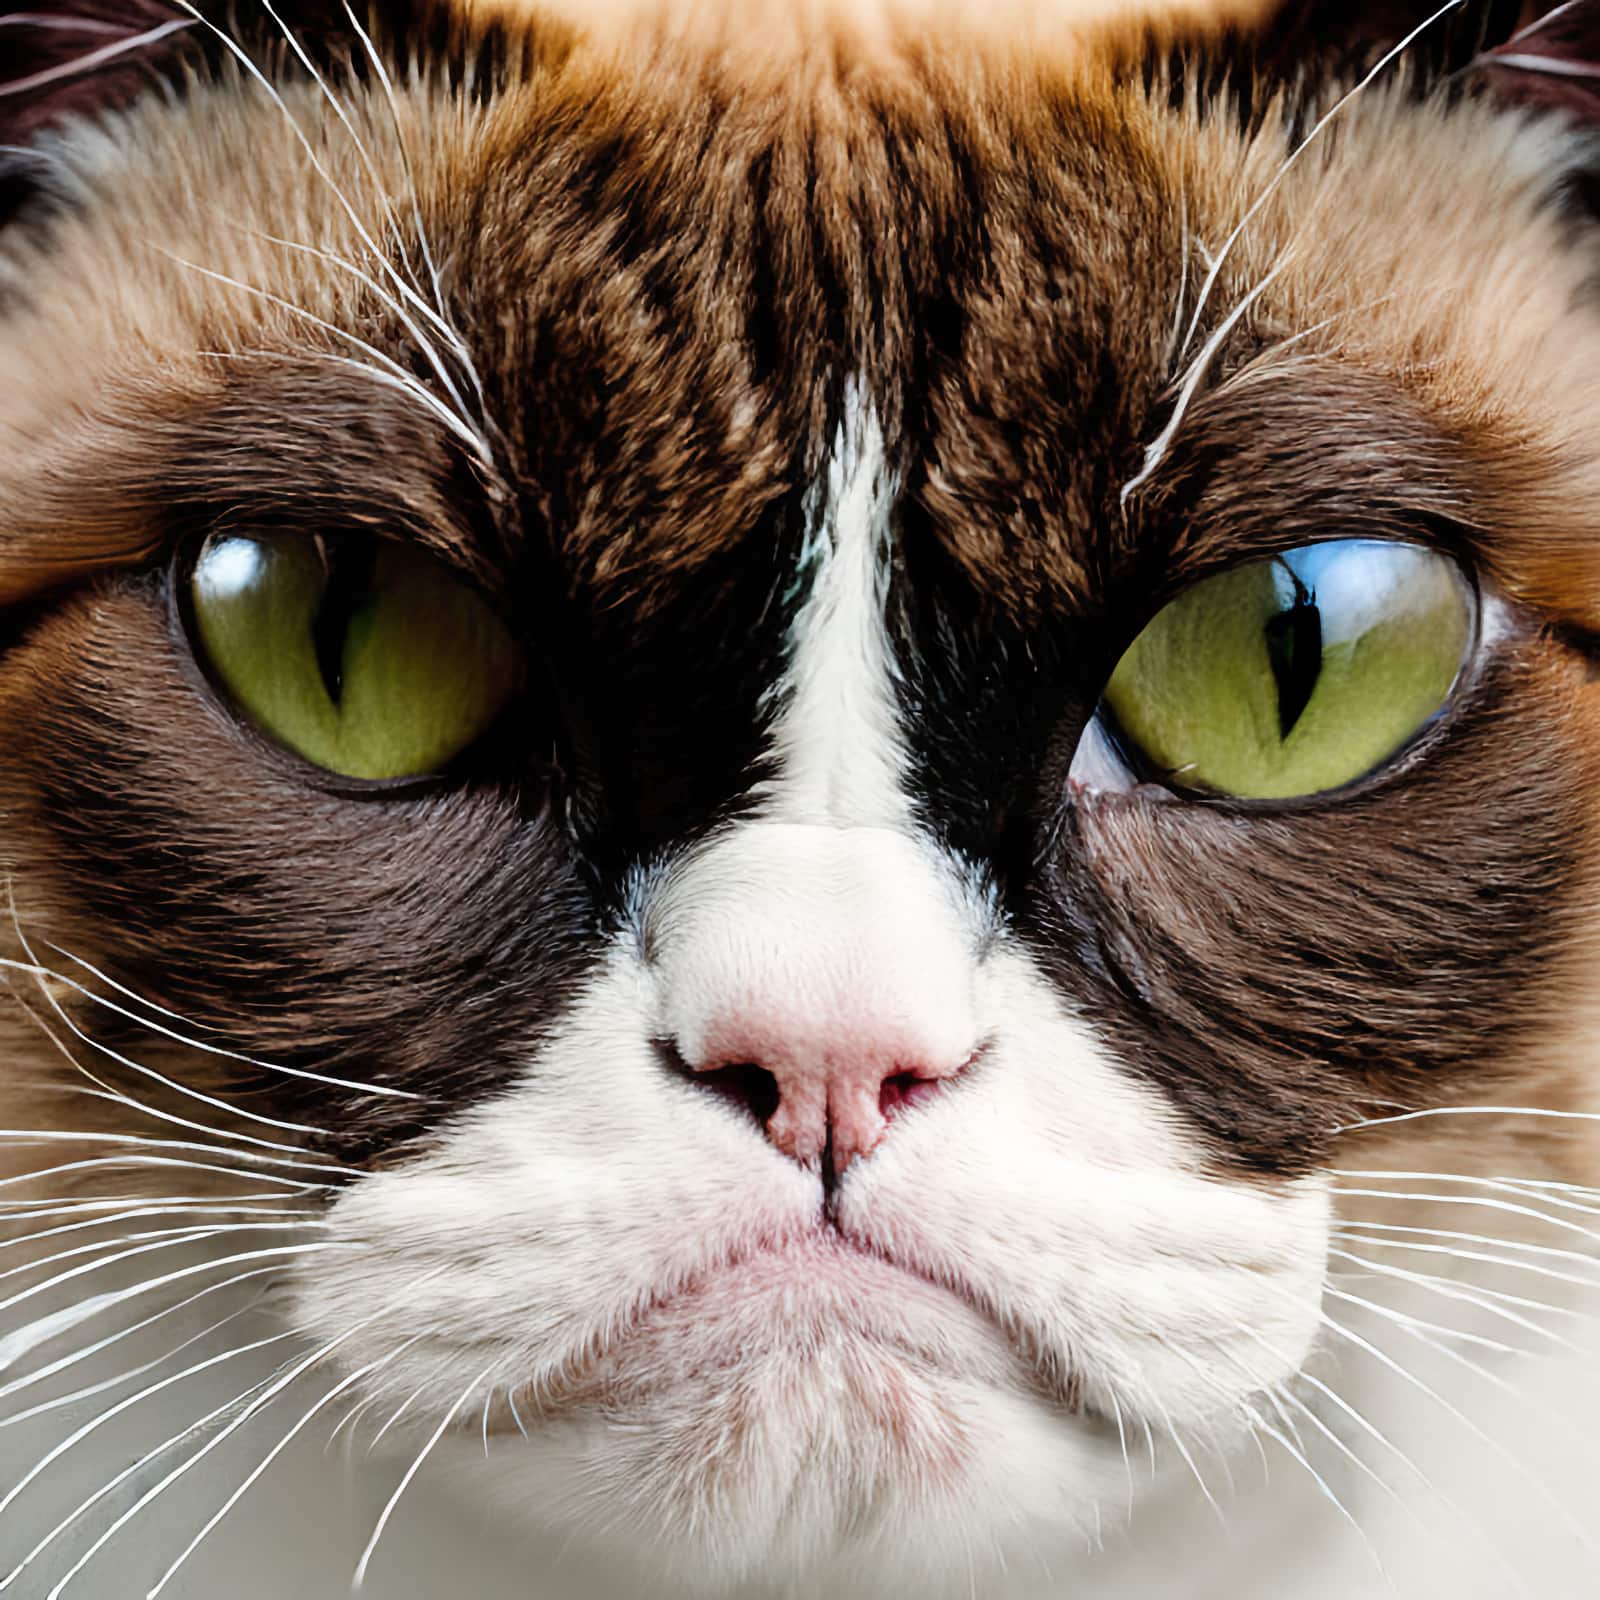 You’ve gained The Grumpy Cat Badge: gamification and social networks